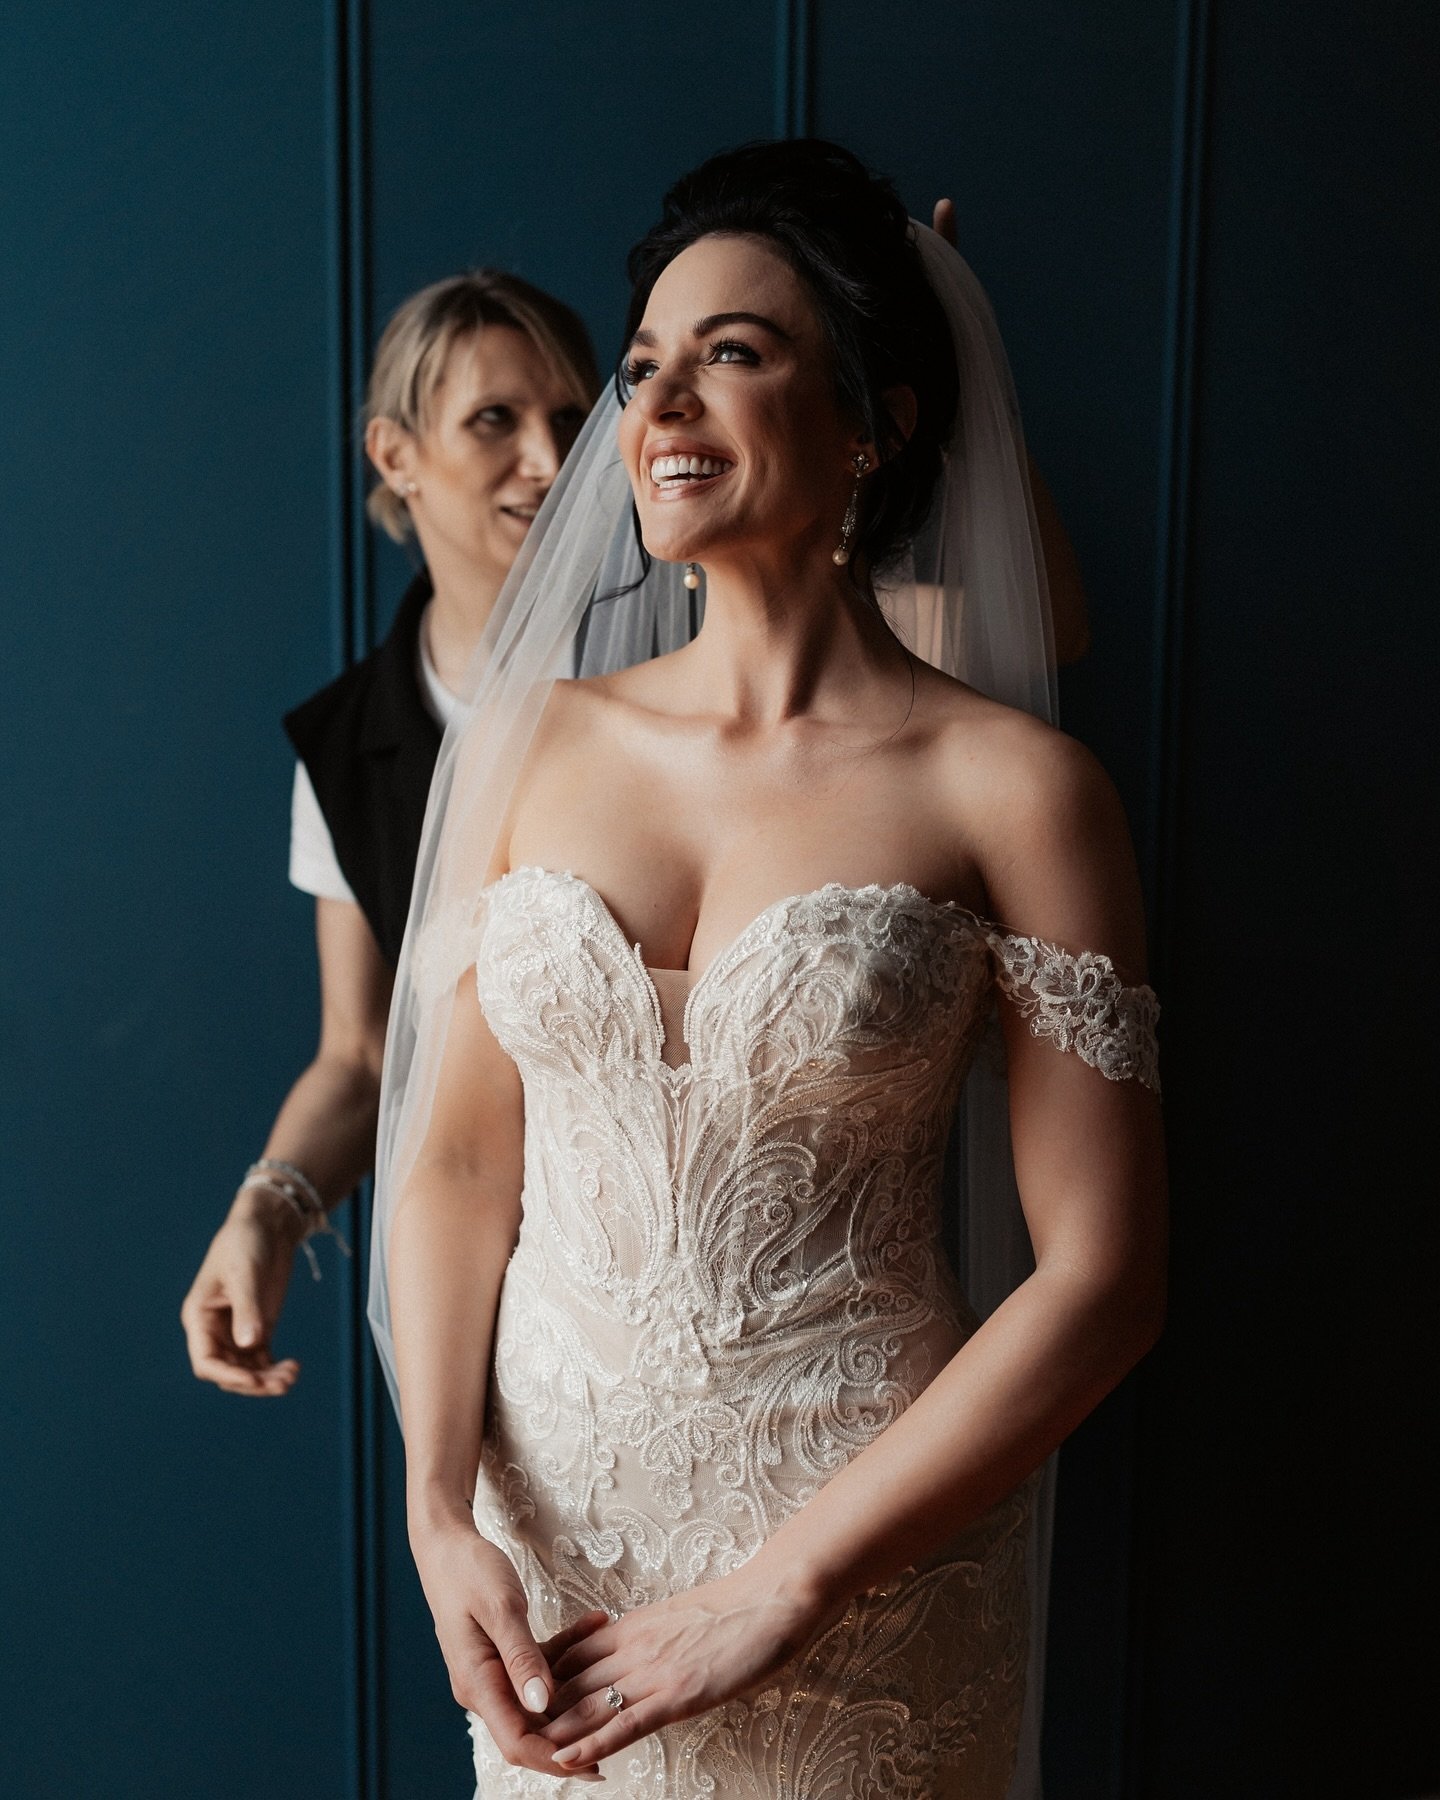 Every bride carries a dream of looking her most beautiful on her wedding day. But behind this dream is the artistry and devotion of a hair and makeup artist, whose skills transform this dream into a breathtaking reality. 💫

As a bride sits in the ch